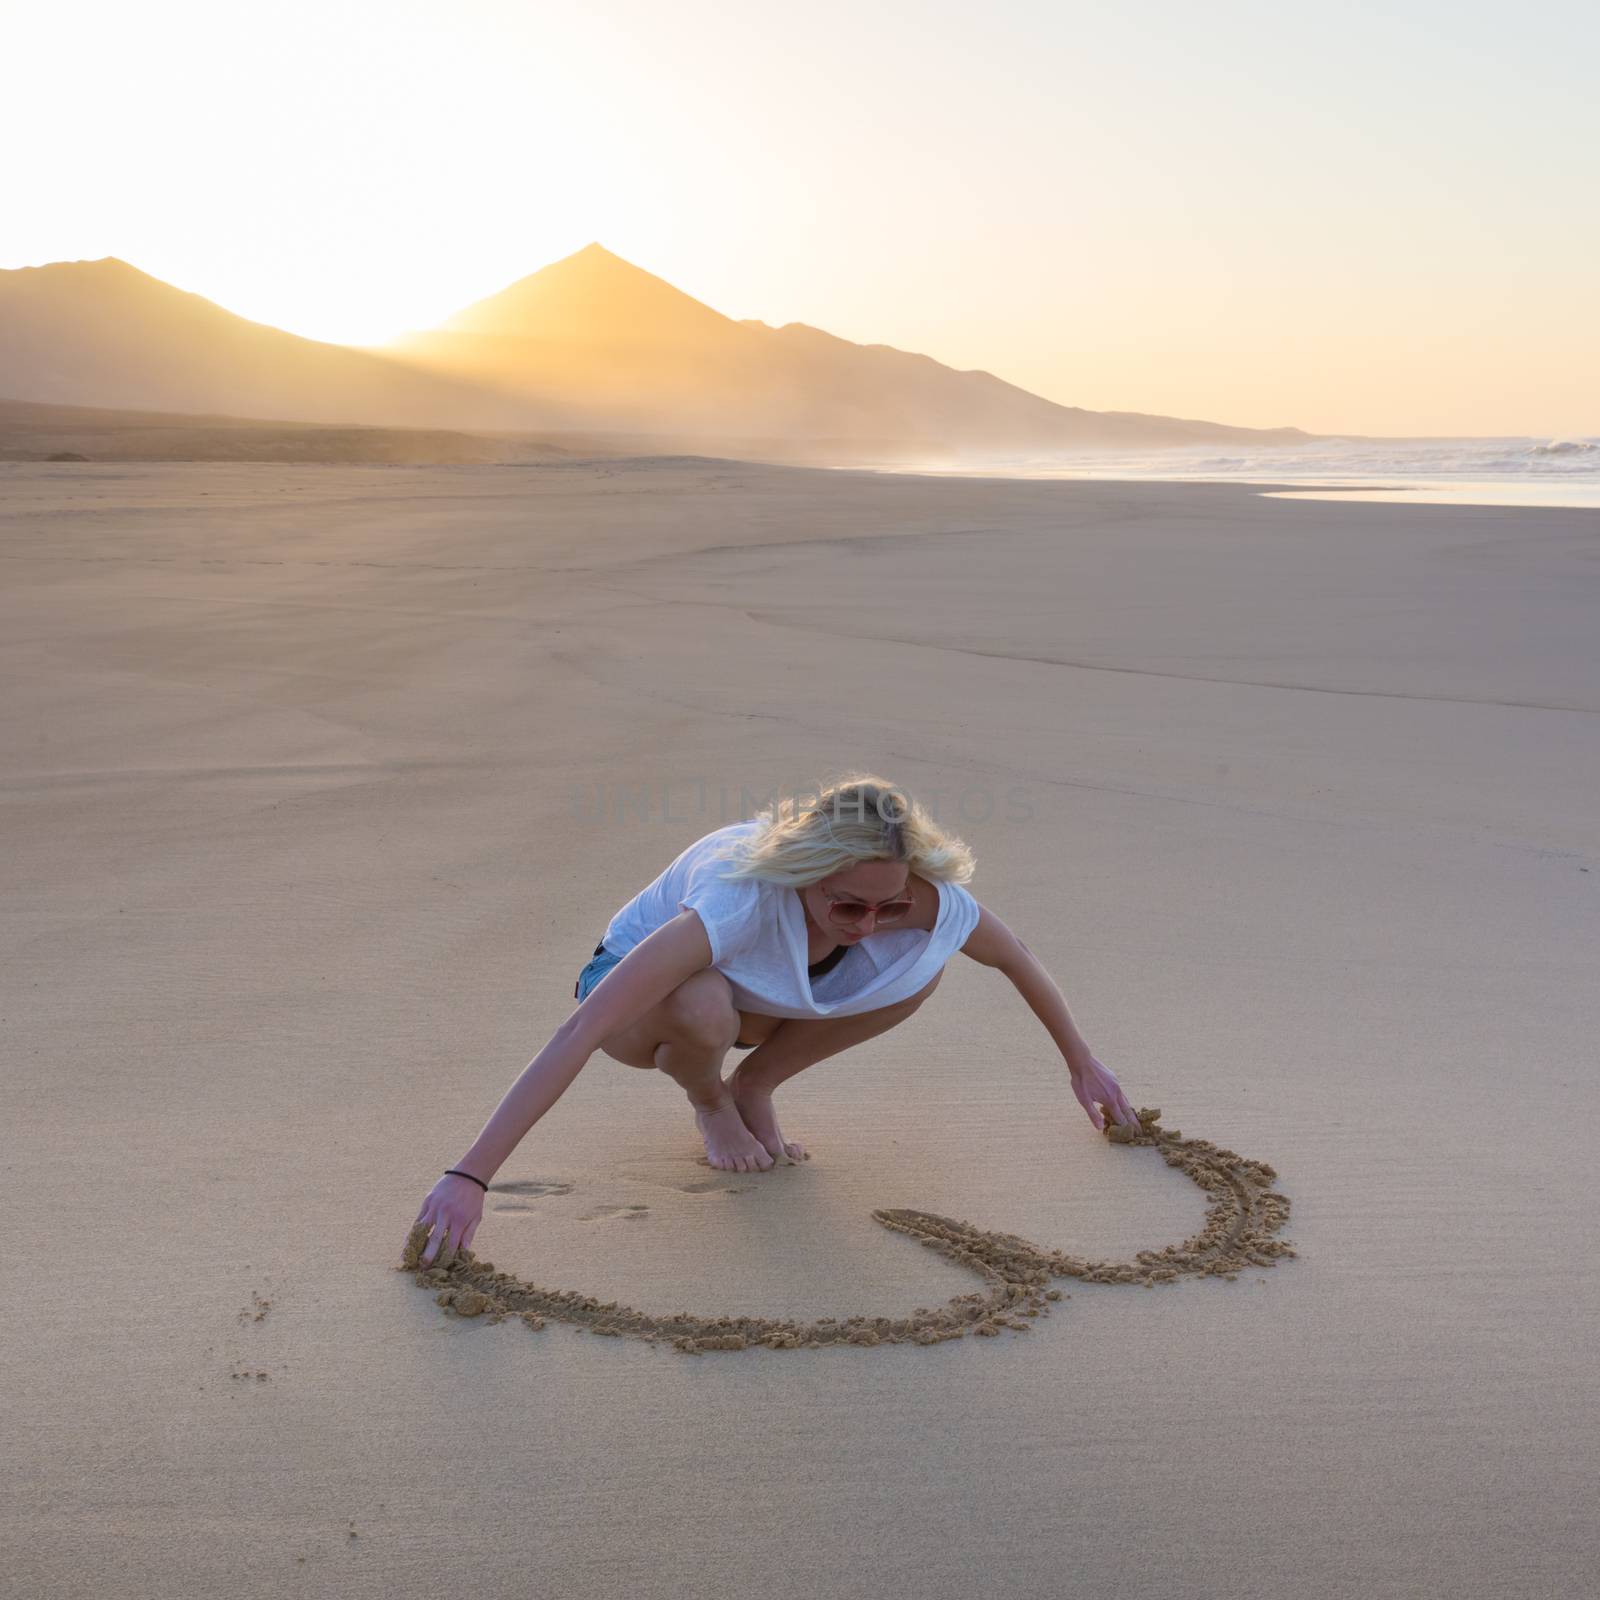 Lady drawing heart shape in sand on beach. by kasto